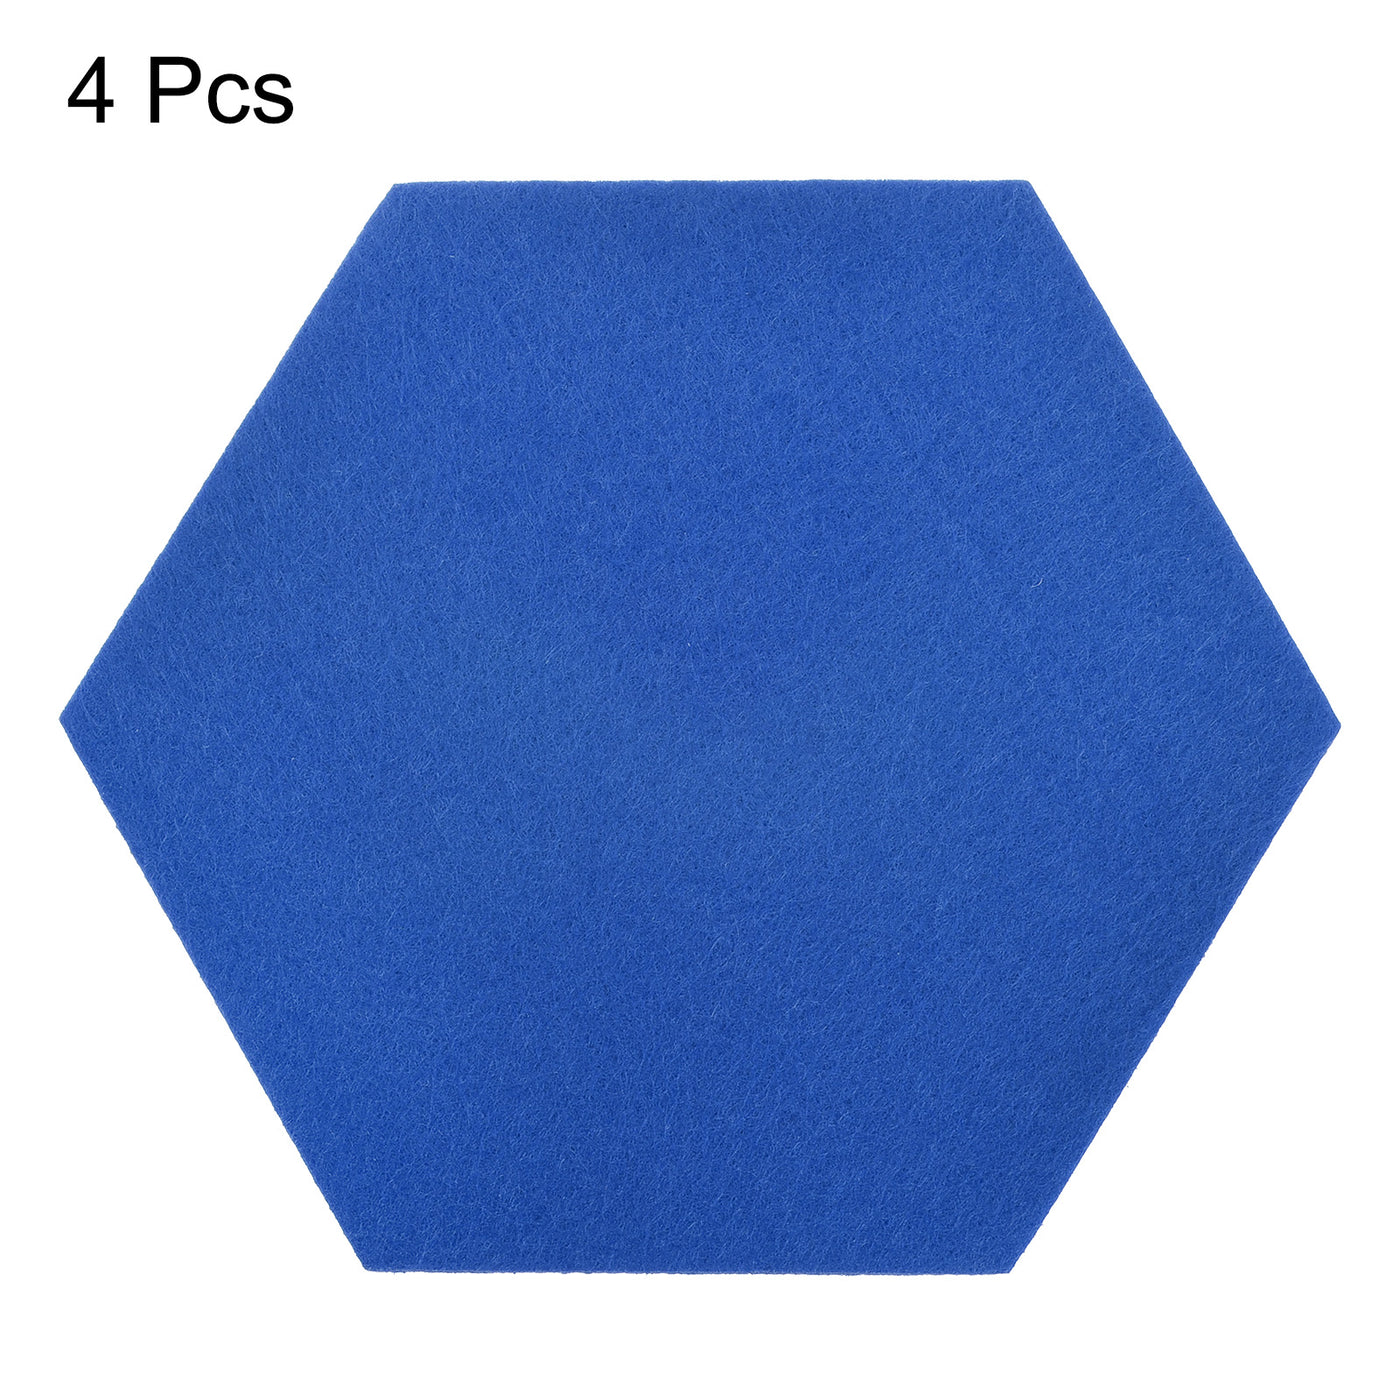 uxcell Uxcell Felt Coasters 4pcs Absorbent Pad Coaster for Drink Cup Pot Bowl Vase Blue